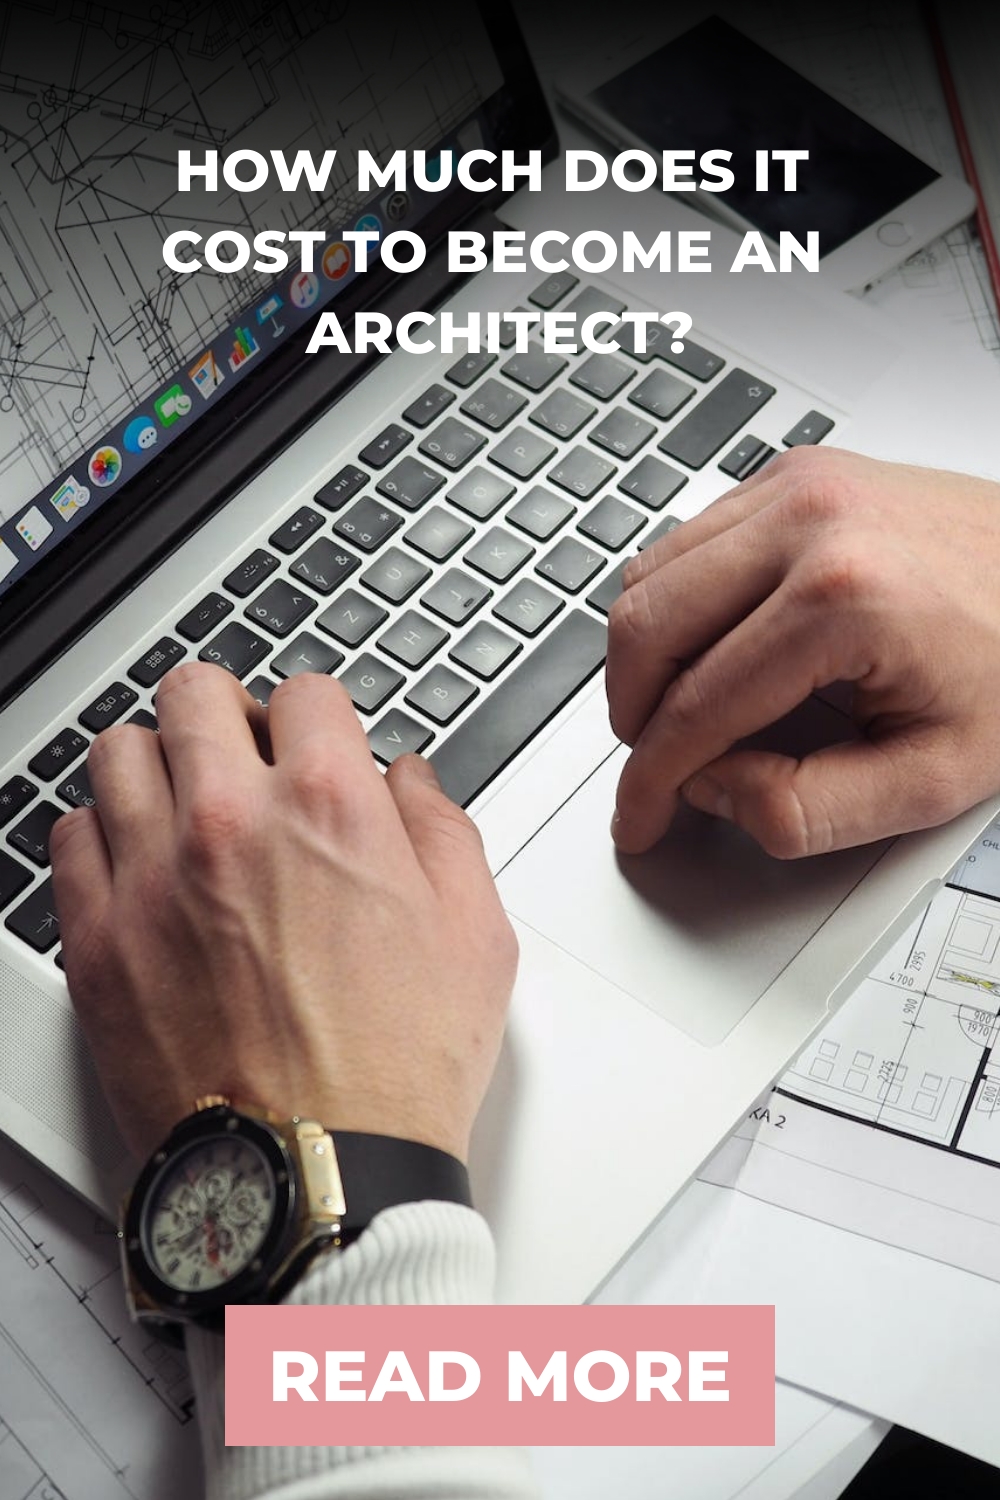 How Much Does it Cost to Become an Architect?